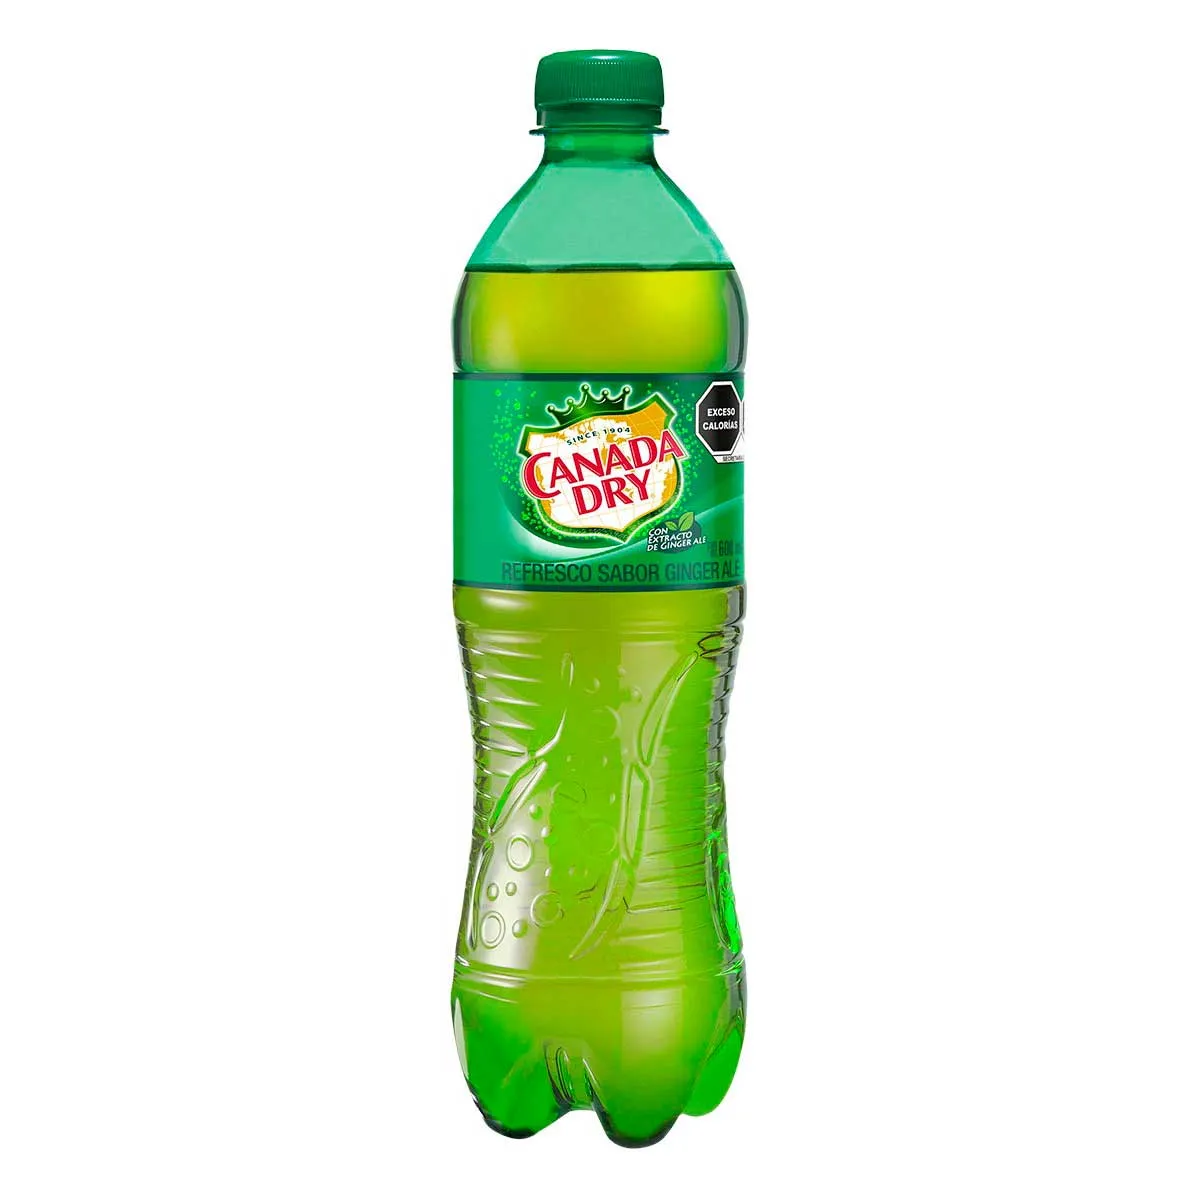 CANADA DRY GINGER ALE 12 600